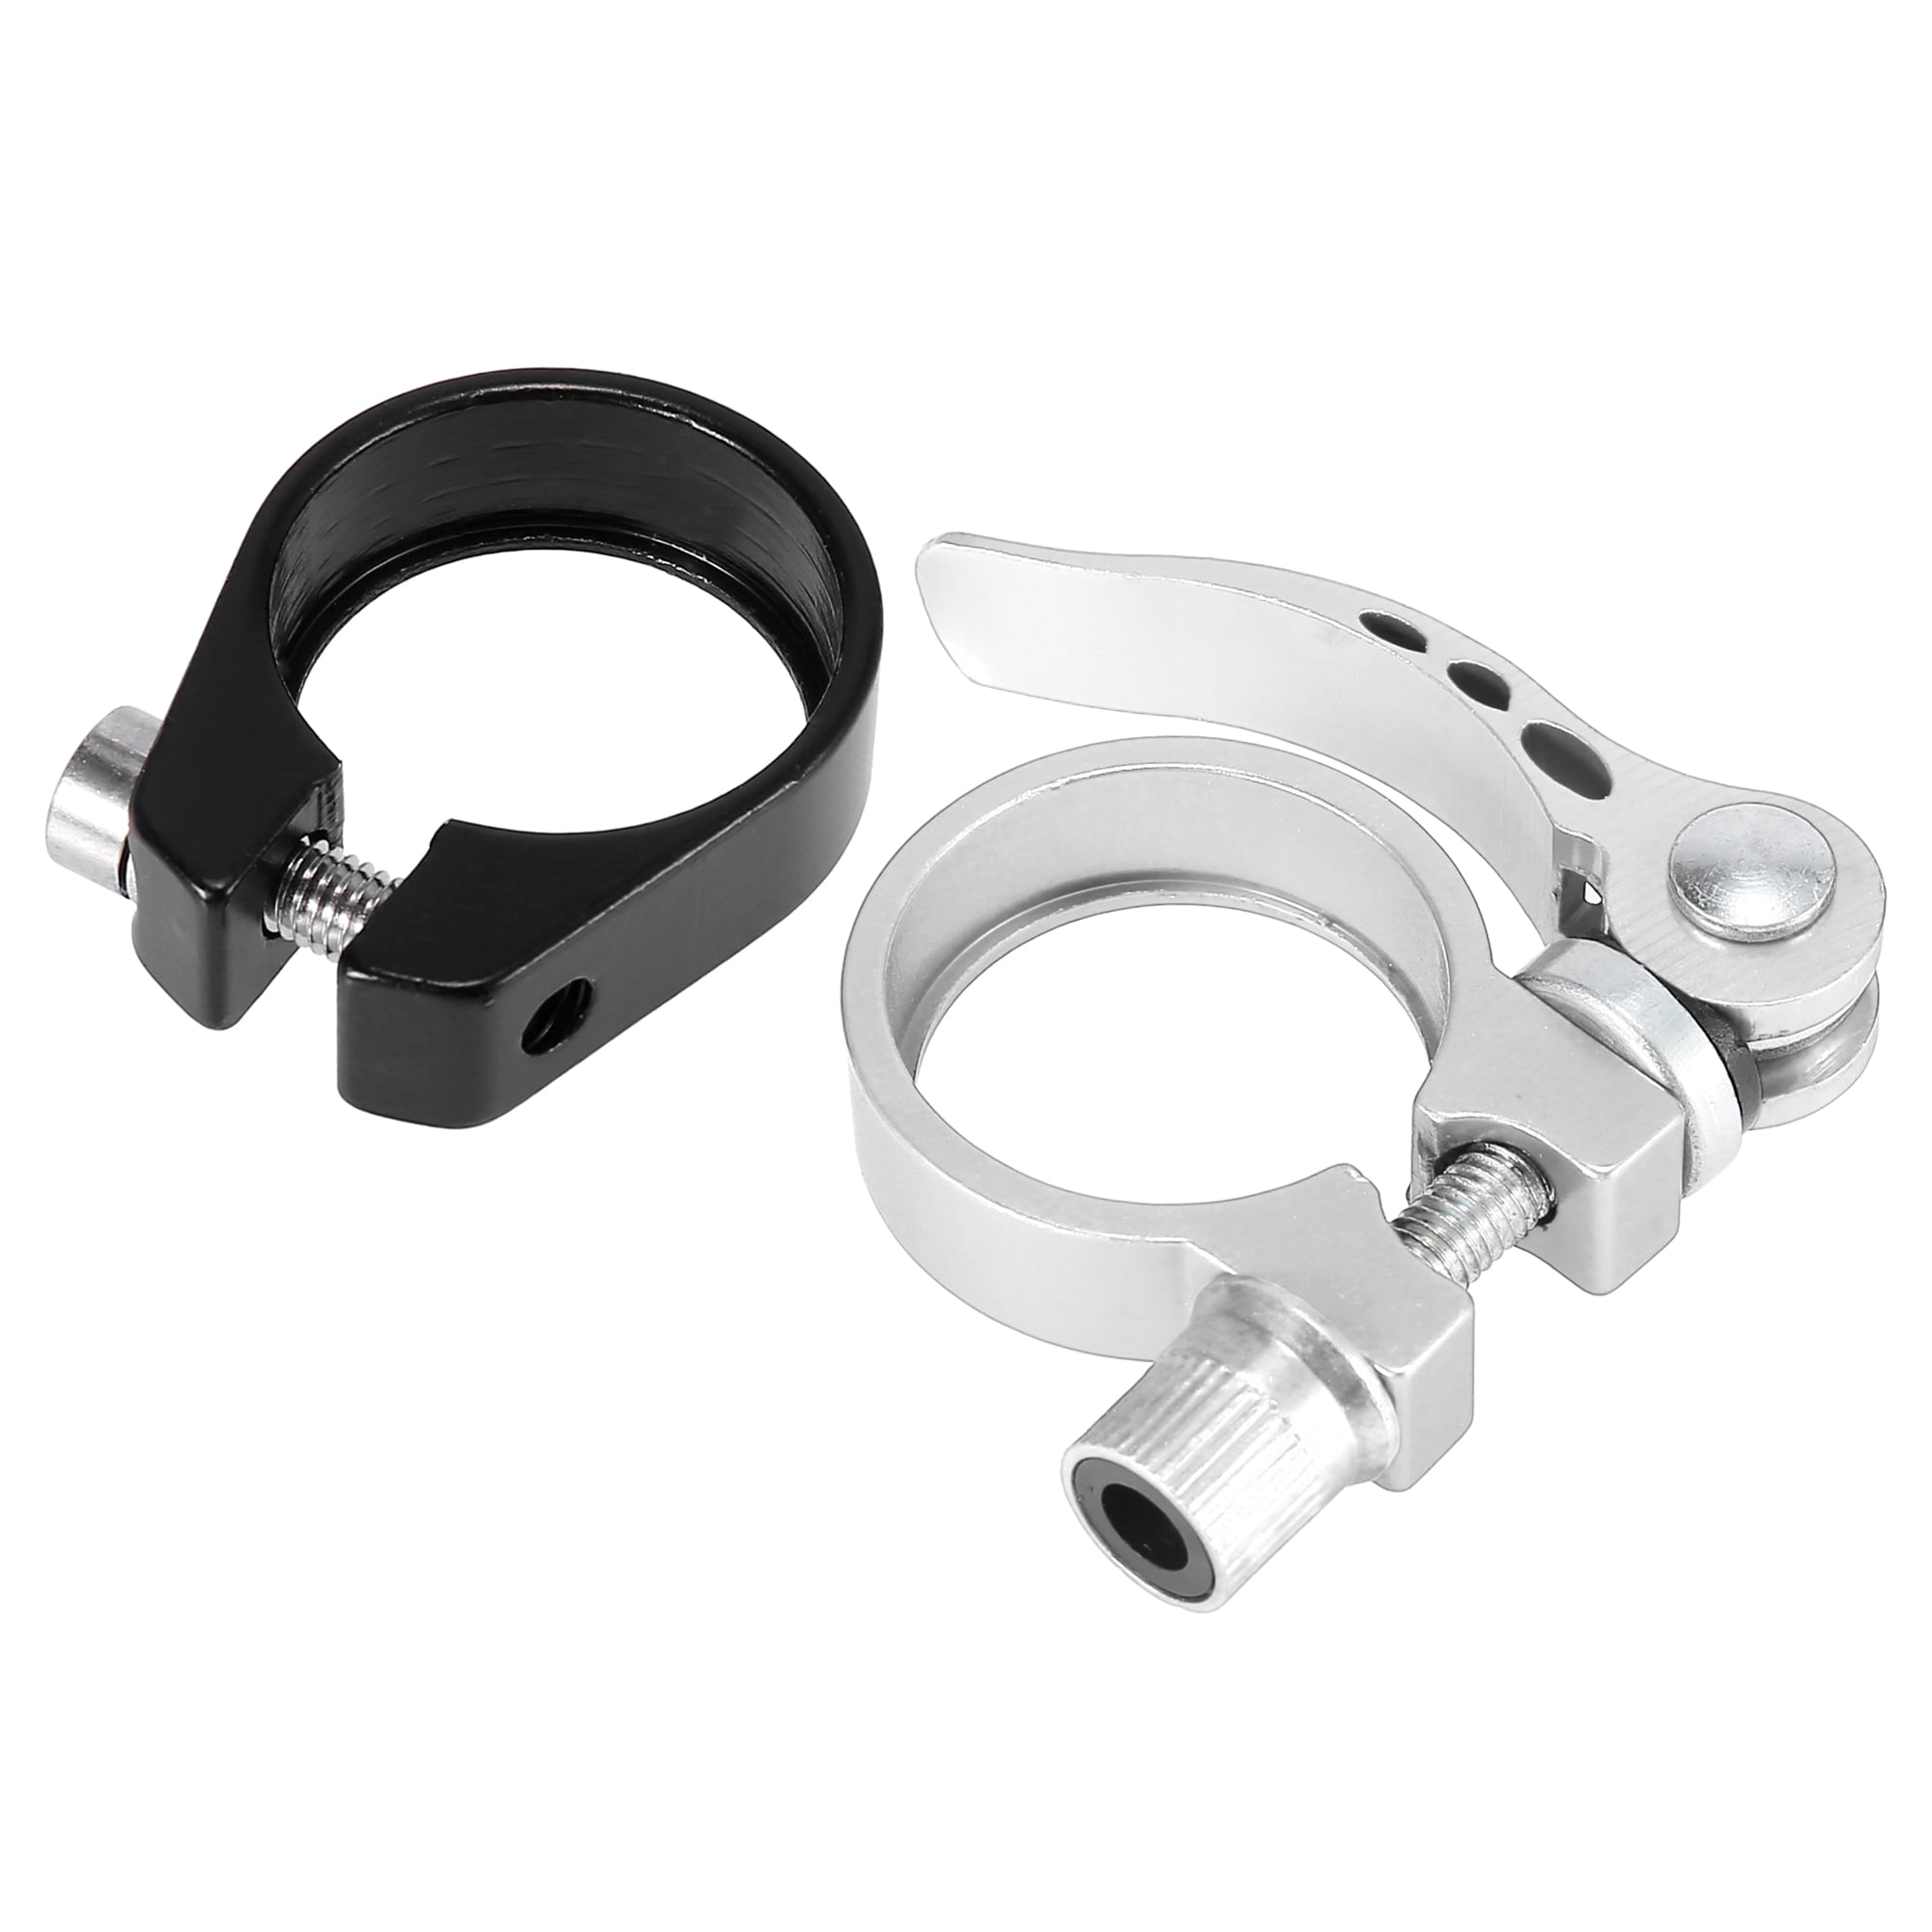 Super Light Seat Tube Clip 31.8mm for 27.2 Seatpost Bike Accessory Dilwe Bicycle Seat Clamp